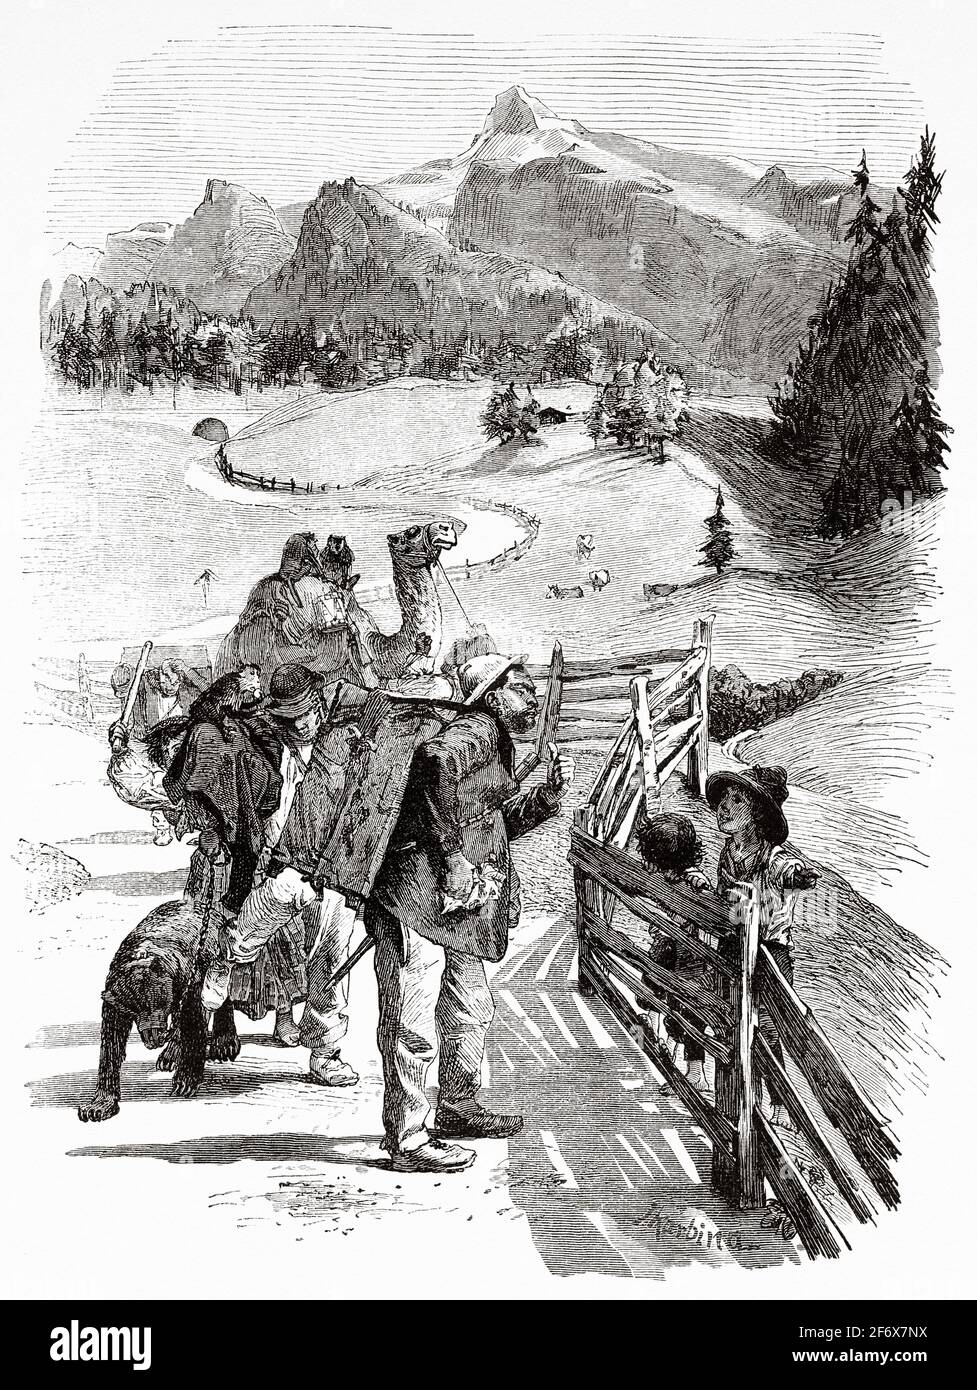 Puppeteers on the old road to Brennero. Trentino-Alto Adige, Italy. Europe. Old 19th century engraved illustration from El Mundo Ilustrado 1879 Stock Photo